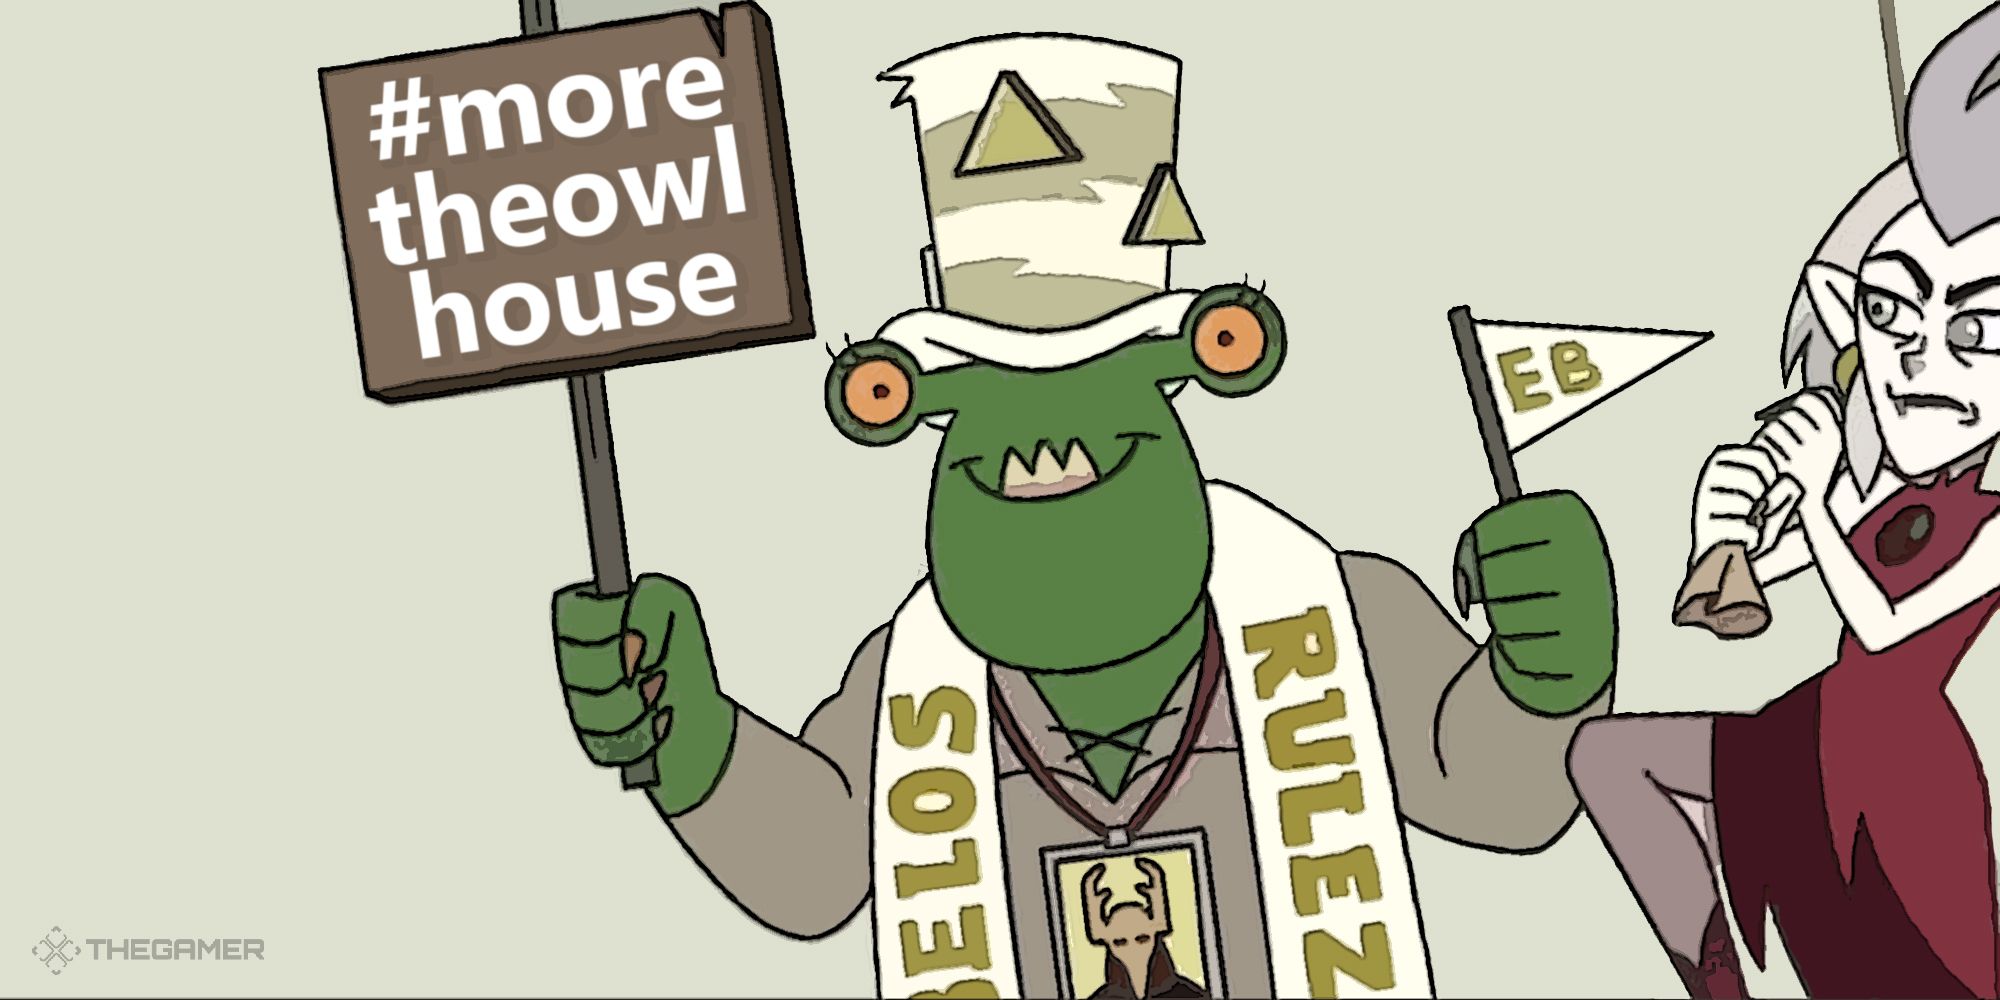 How Rebecca Rose And The Community Are Banding Together To Save The Owl House